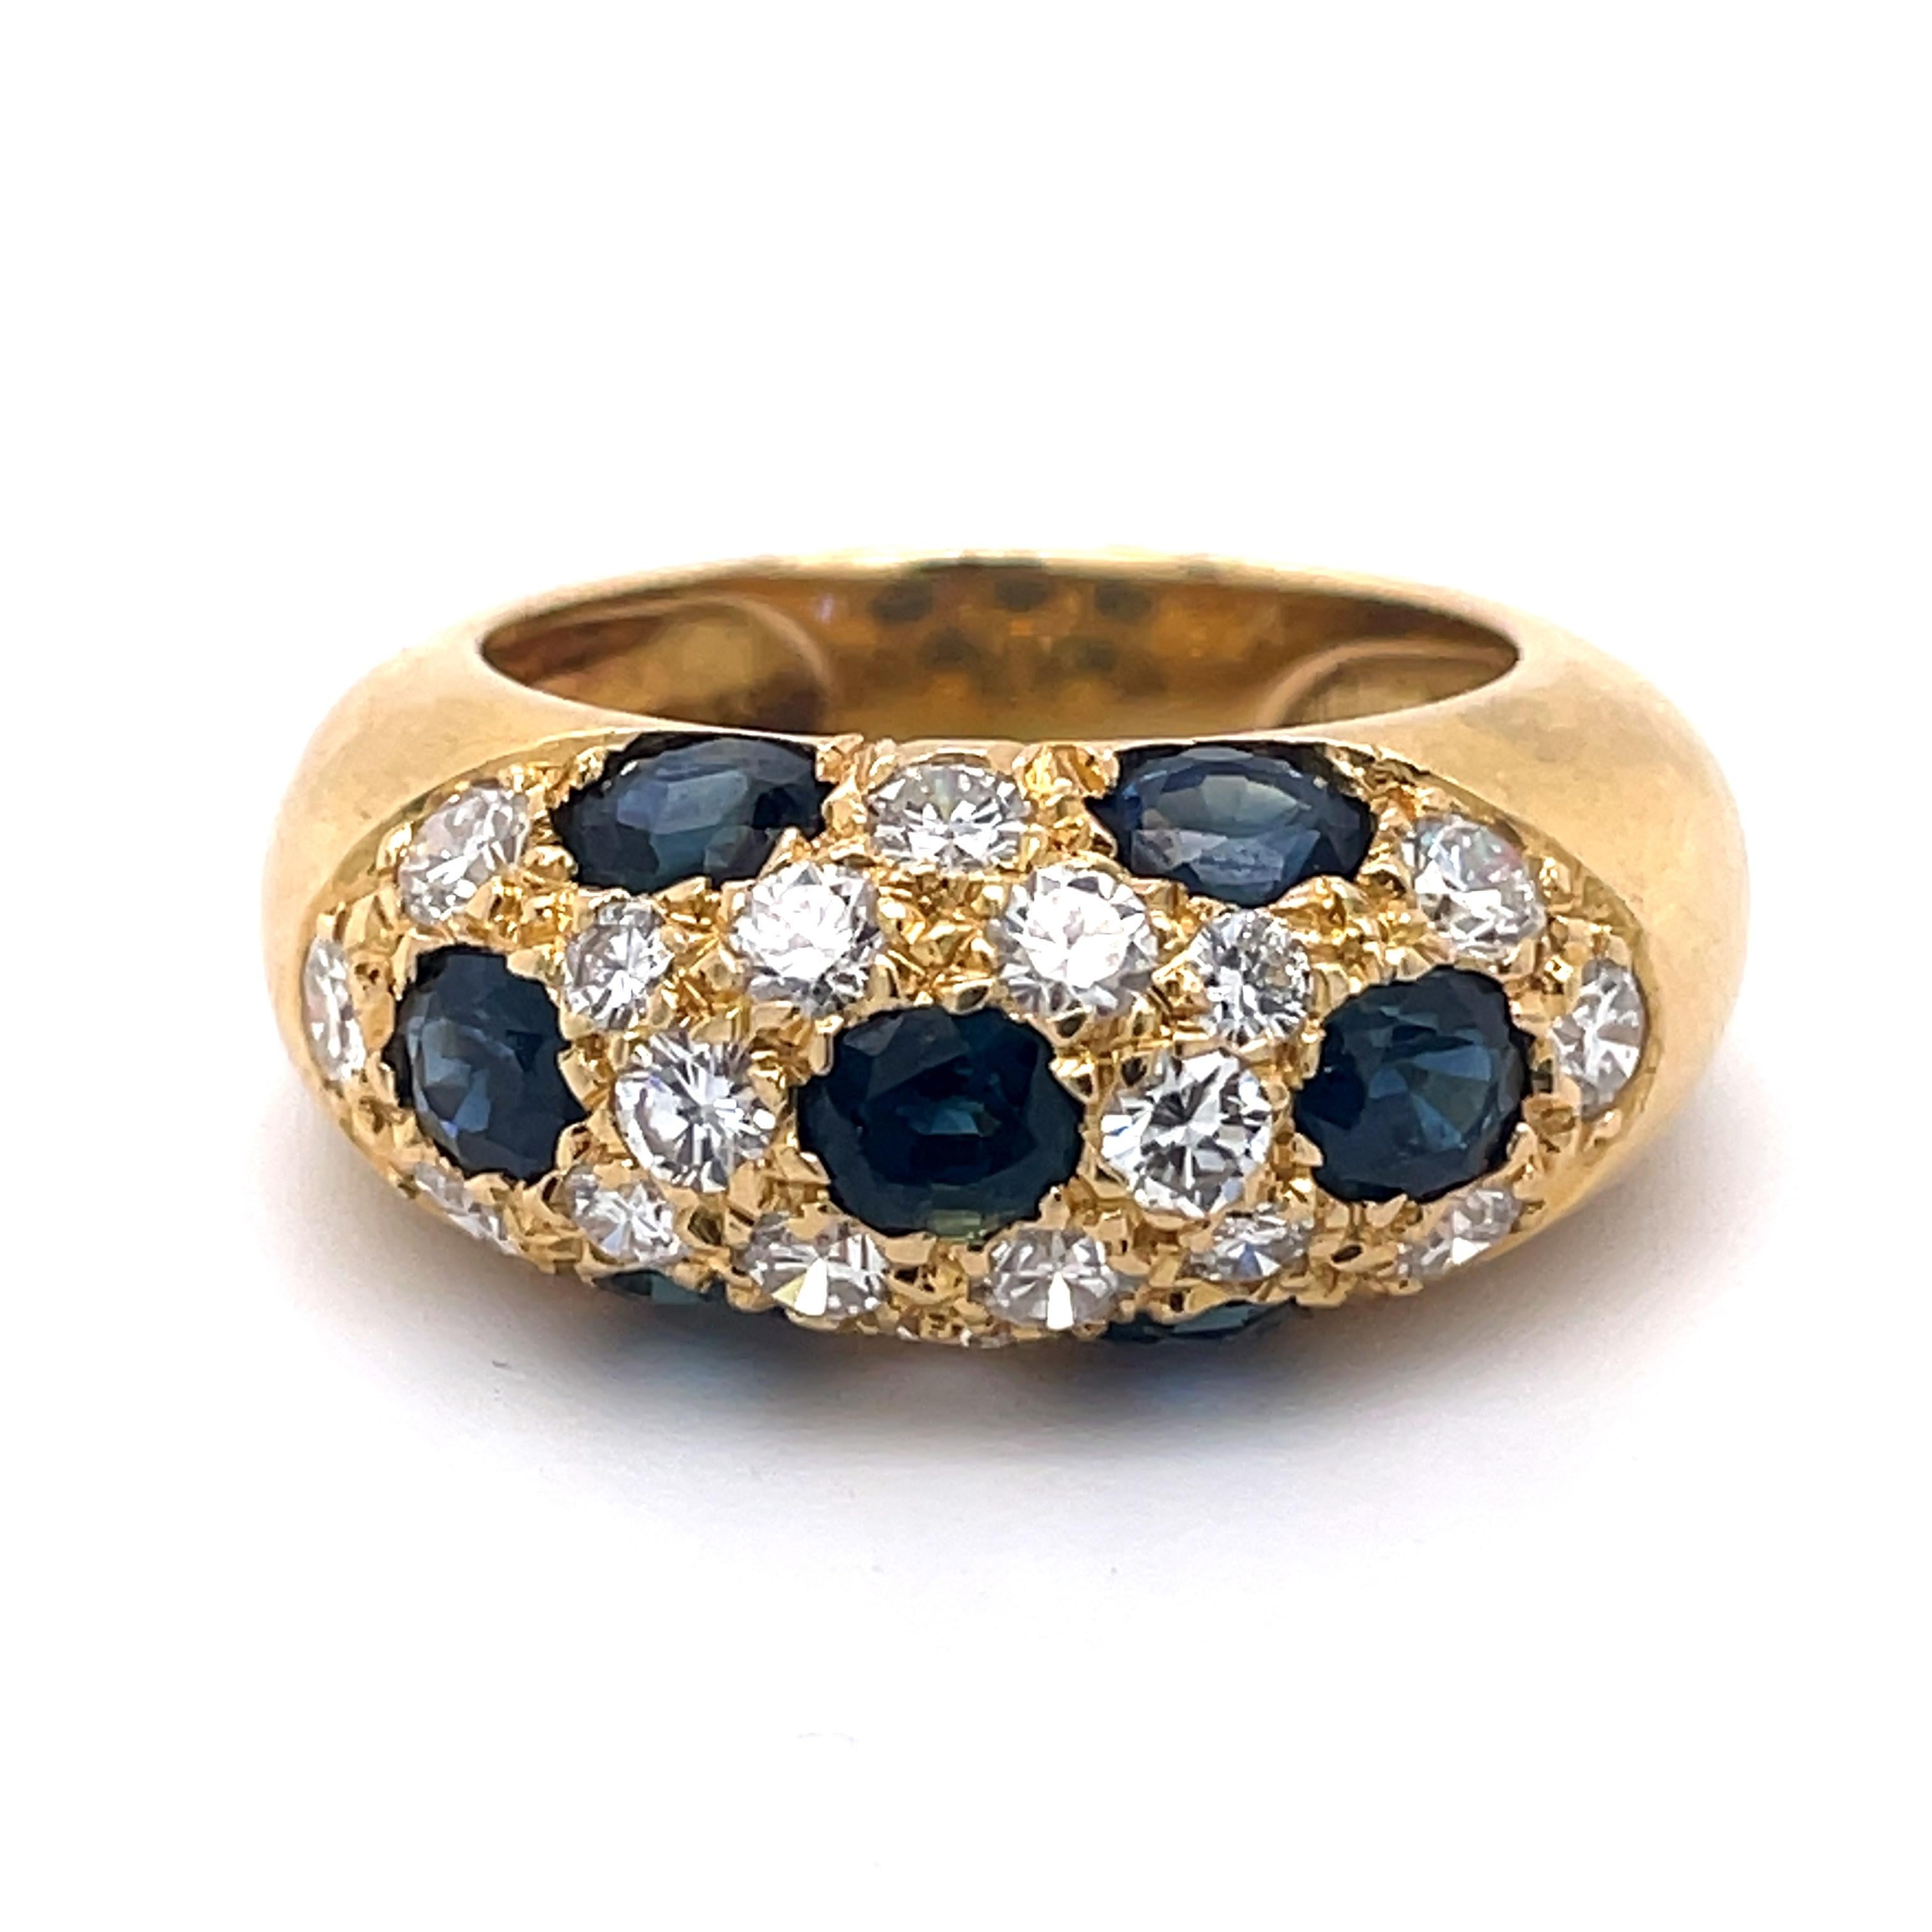 ~~ S e t t i n g ~~
Solid 18k Yellow Gold
10.20 grams
Ring Size 6.5 US

~~ Stones ~~
Main Stone:
Oval Shape Natural Sapphire In Weight Of 2.10 Ct (Approx.) 
Color  - Blue

Side Stones:
Round Shape Natural Diamond In Weight Of 0.99 Ct